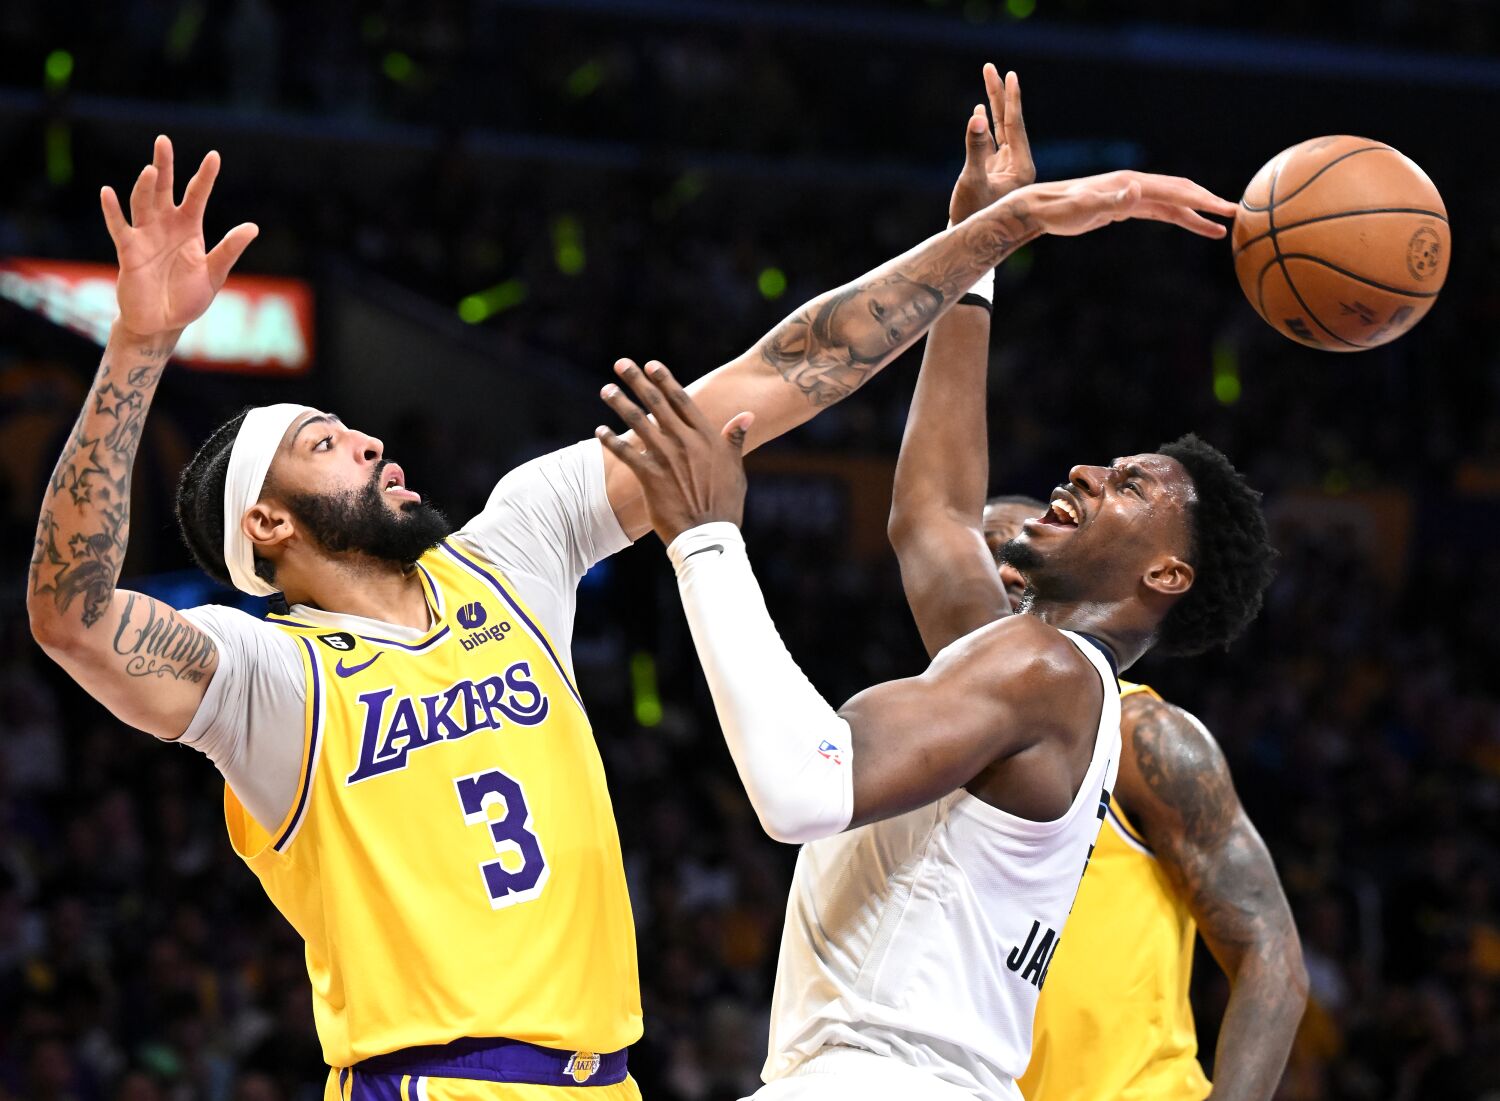 LeBron James and the Lakers eliminate Grizzlies in a Game 6 rout